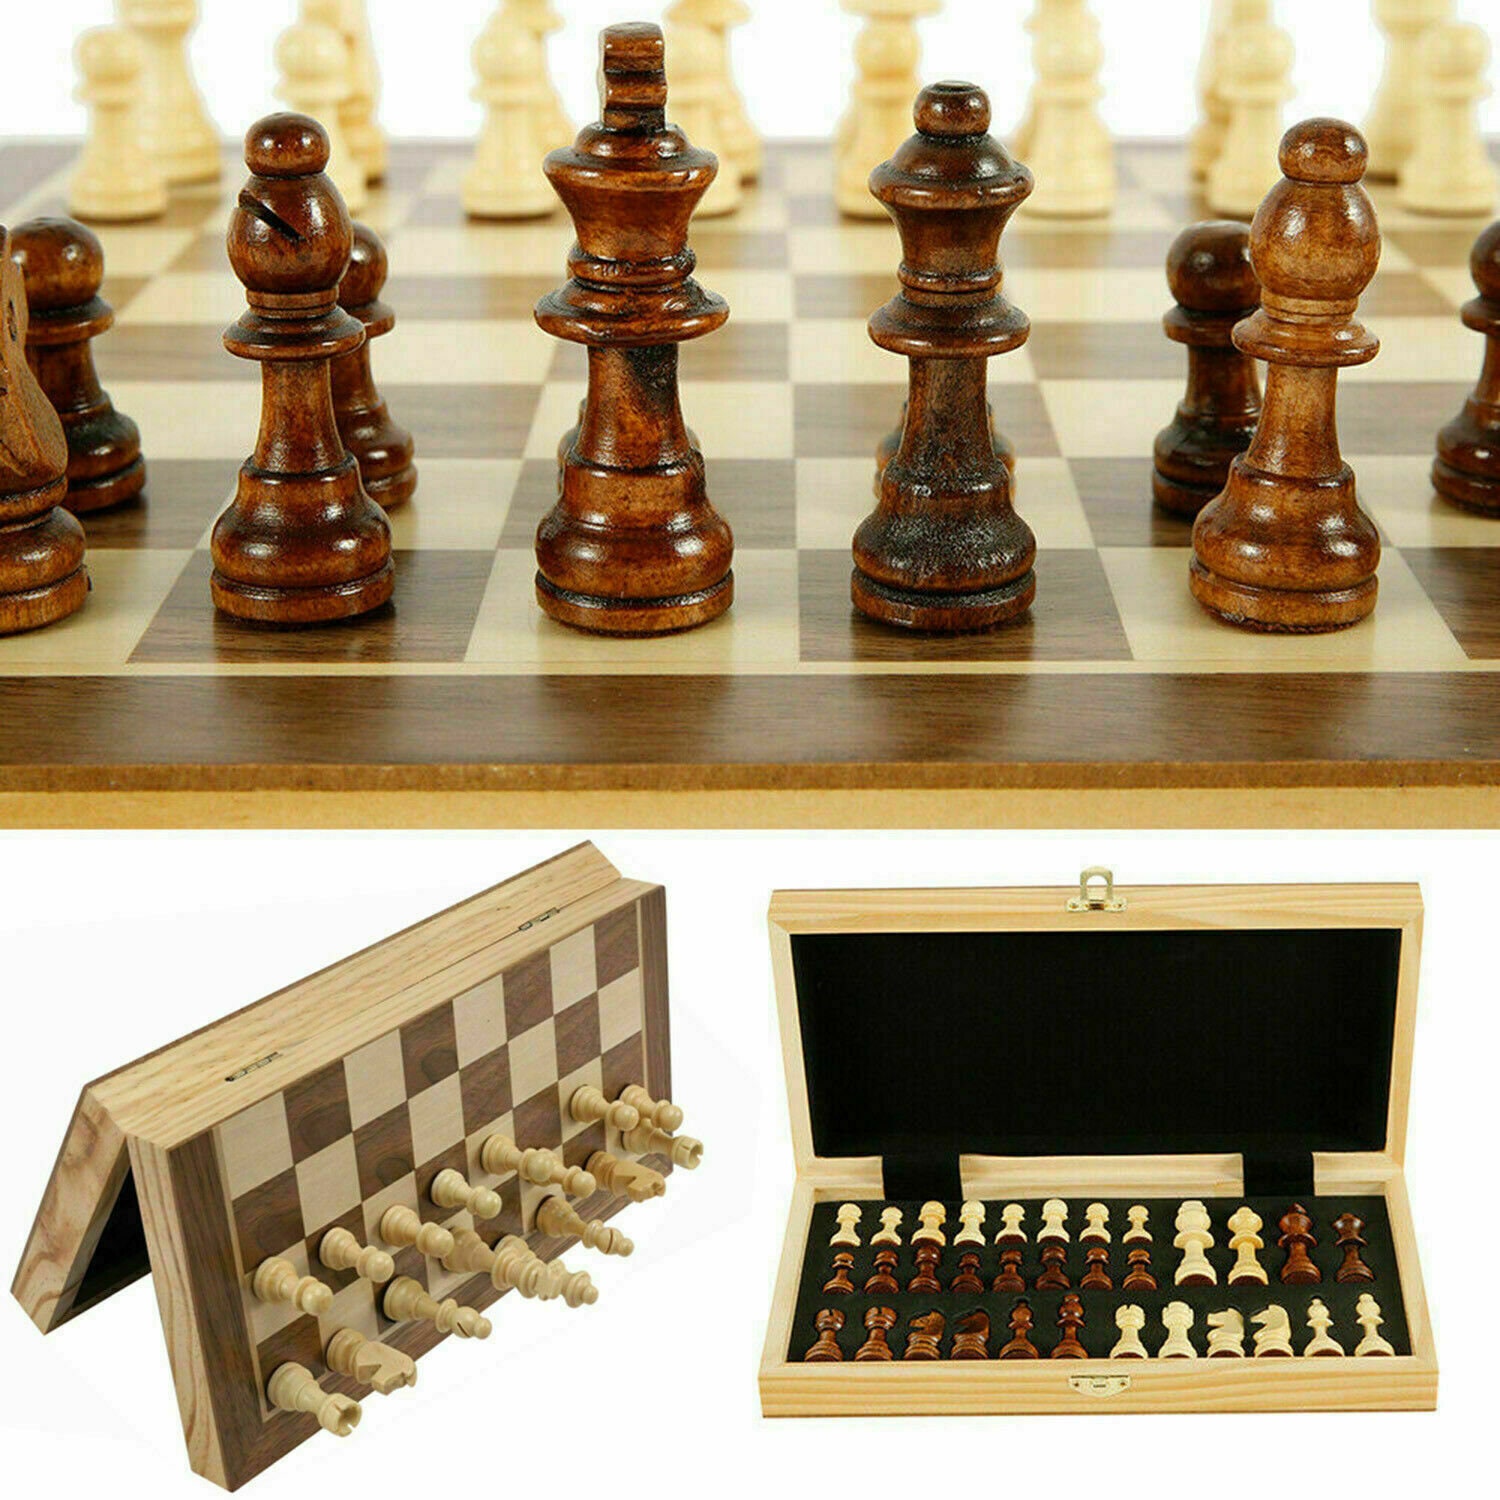  15 Metal Chess Sets for Adults Kids with Zinc Alloy + Acrylic Chess  Pieces & Portable Folding Wooden Chess Board Travel Chess Set Board Game  Gift – Elegant Metal Chessmen 